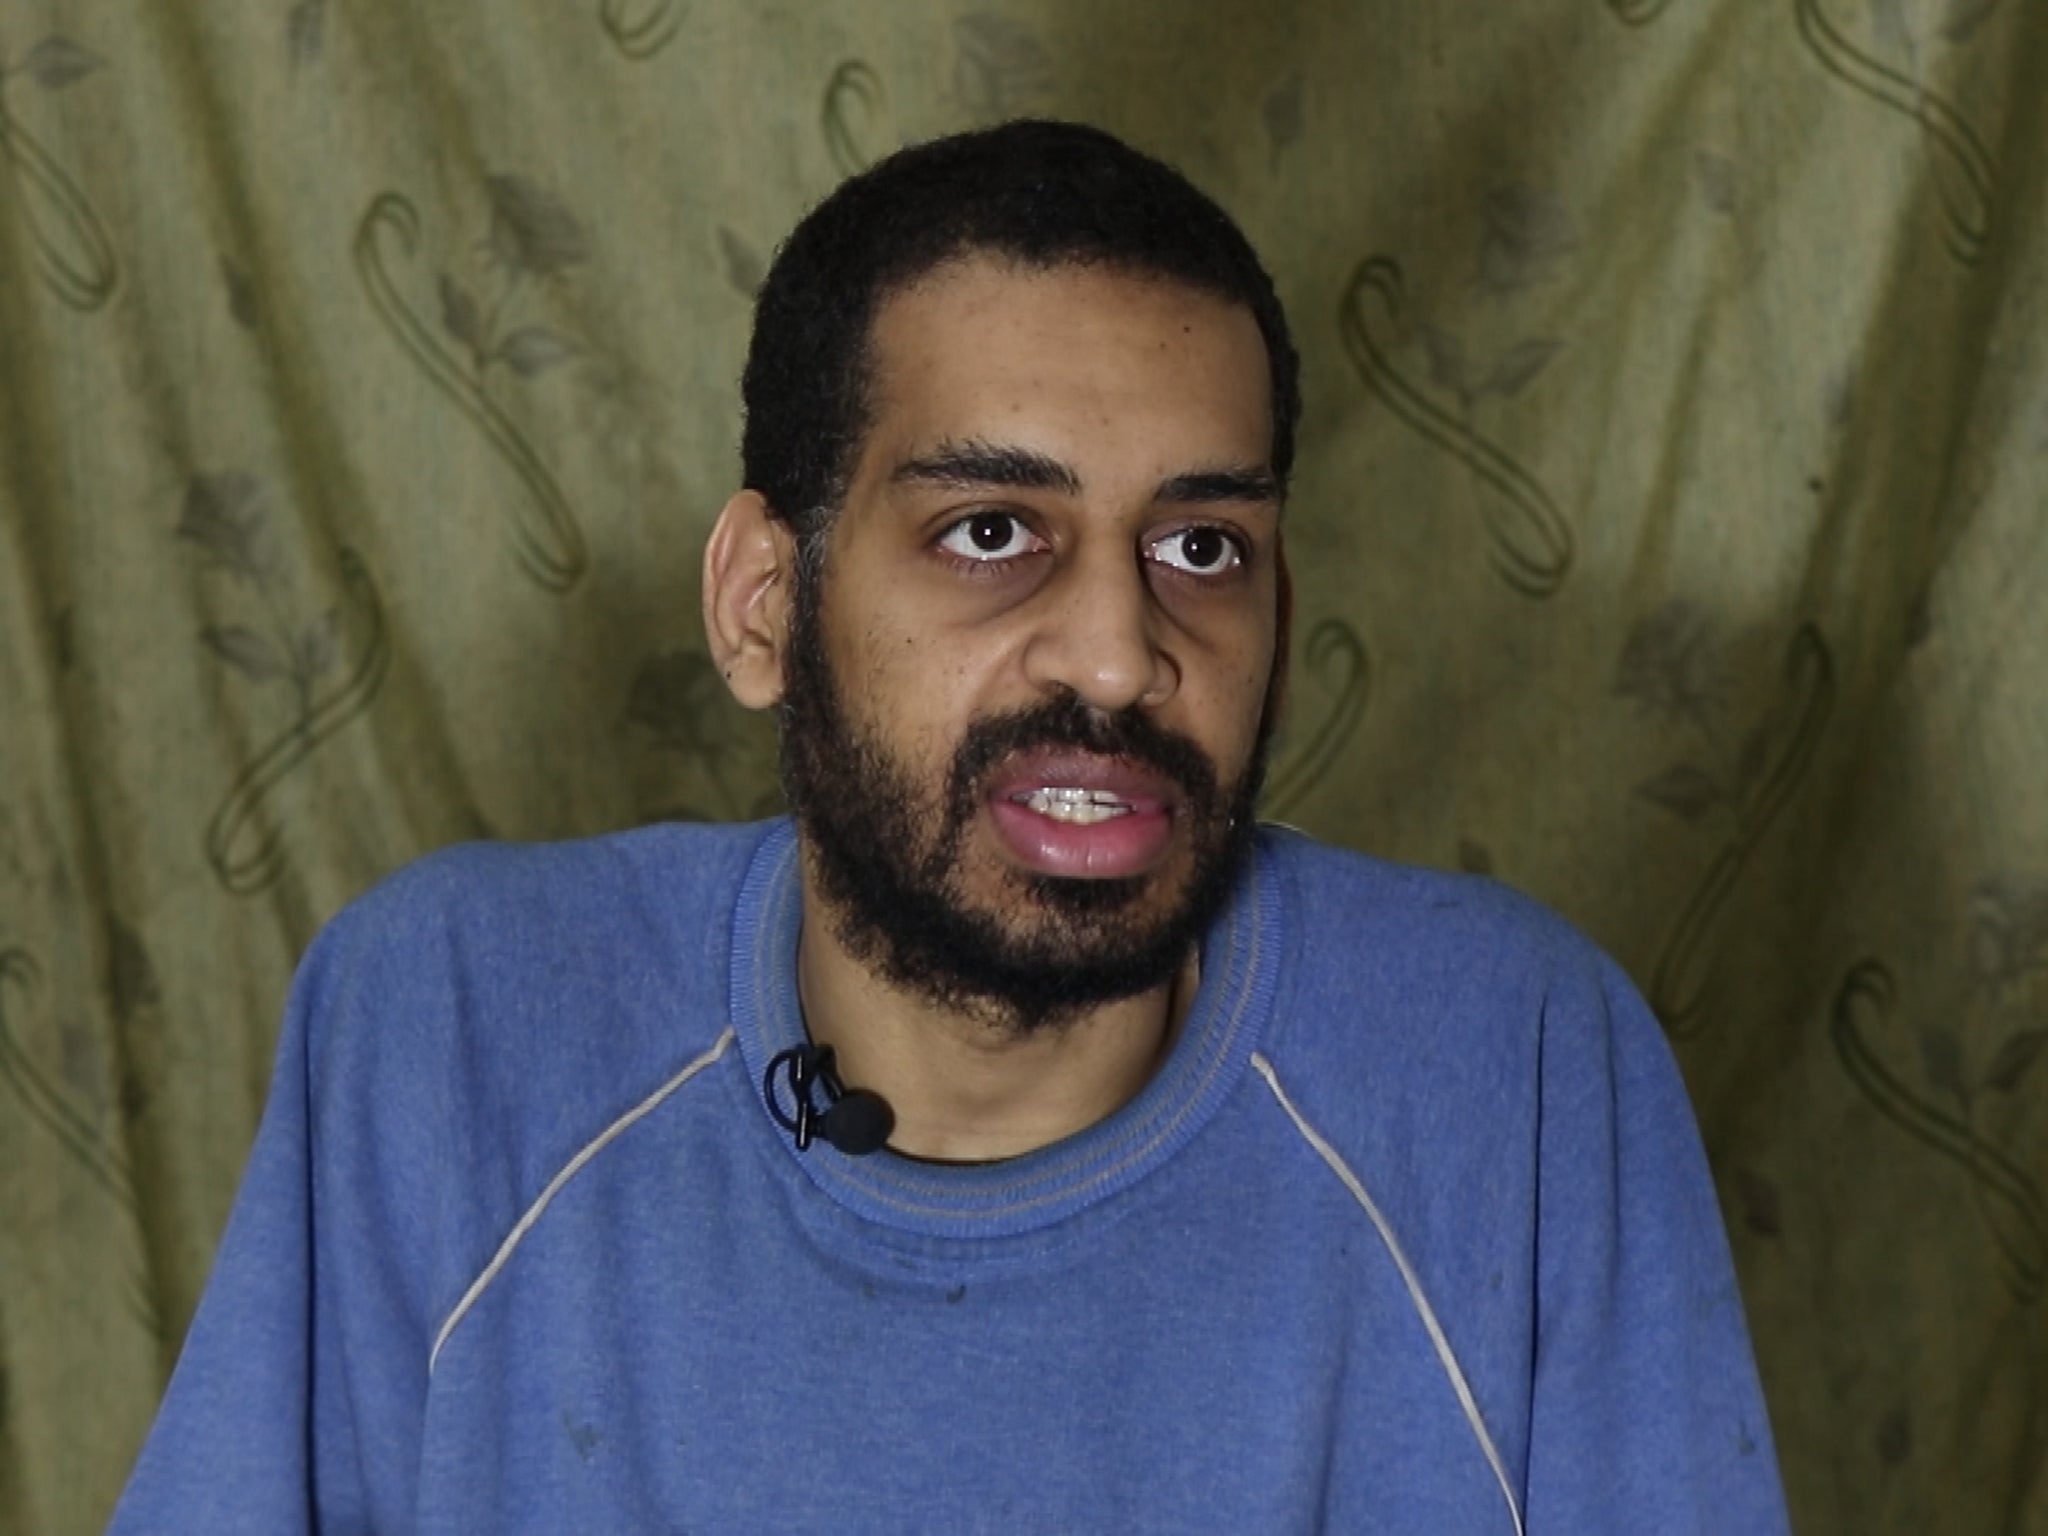 Alexanda Kotey, originally from London, also revealed his role as a hostage-keeper